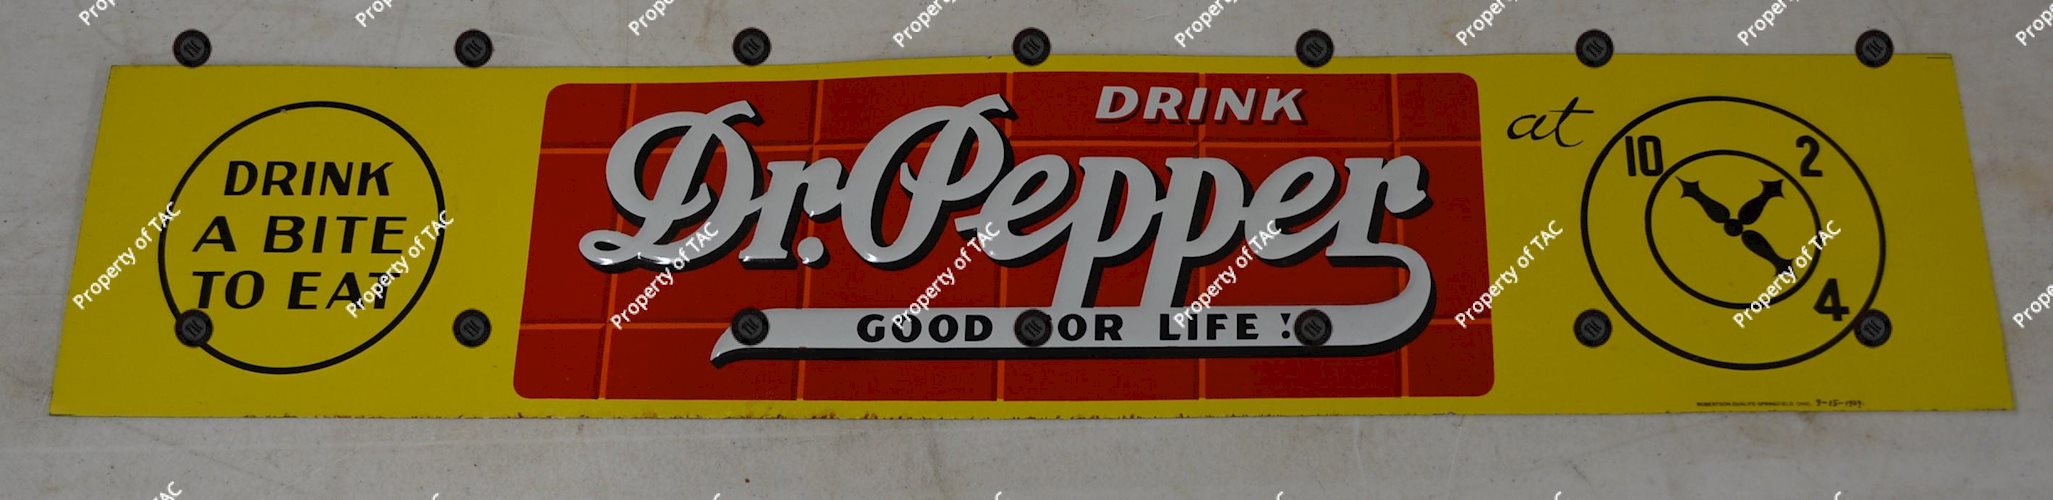 Drink Dr. Pepper Good For Life! Drink a Bite To Eat 10-2-4 Metal Sign